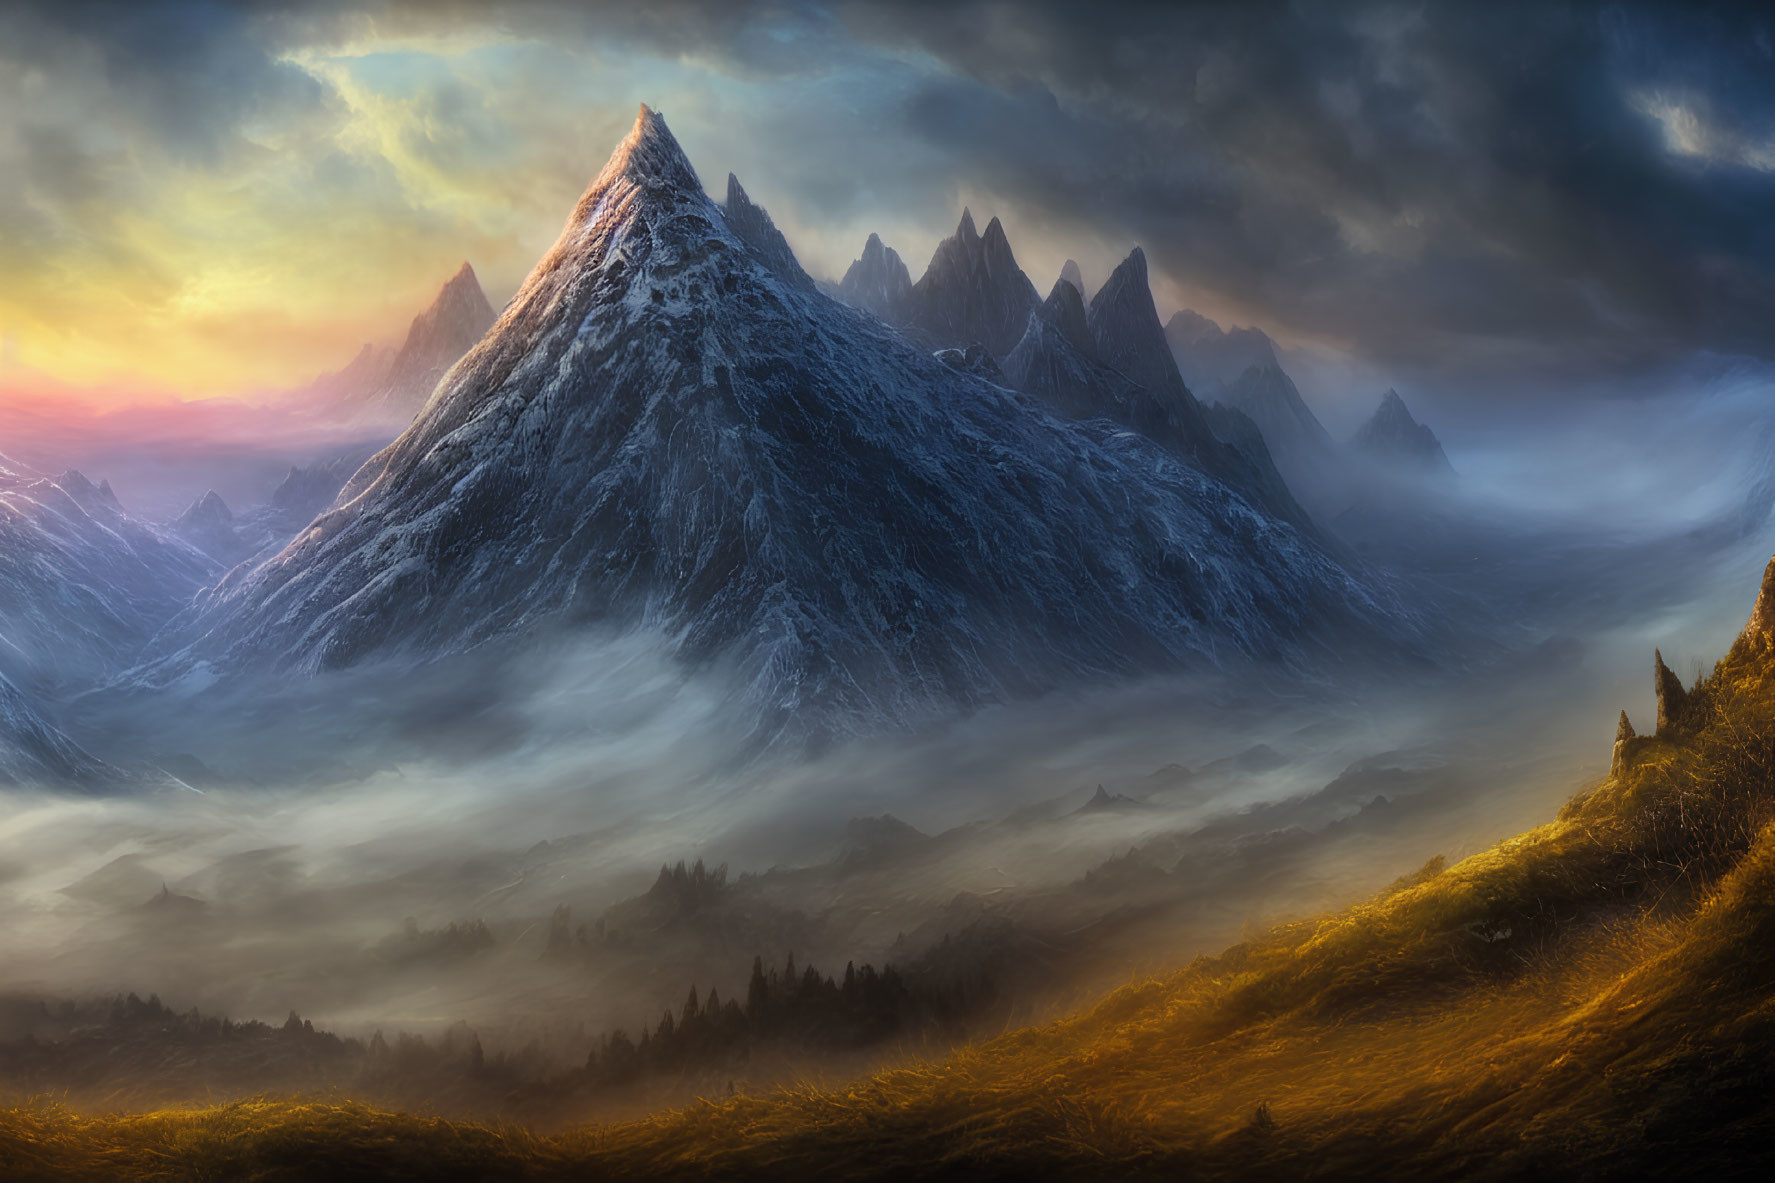 Misty landscape with snow-covered mountain peaks at sunrise